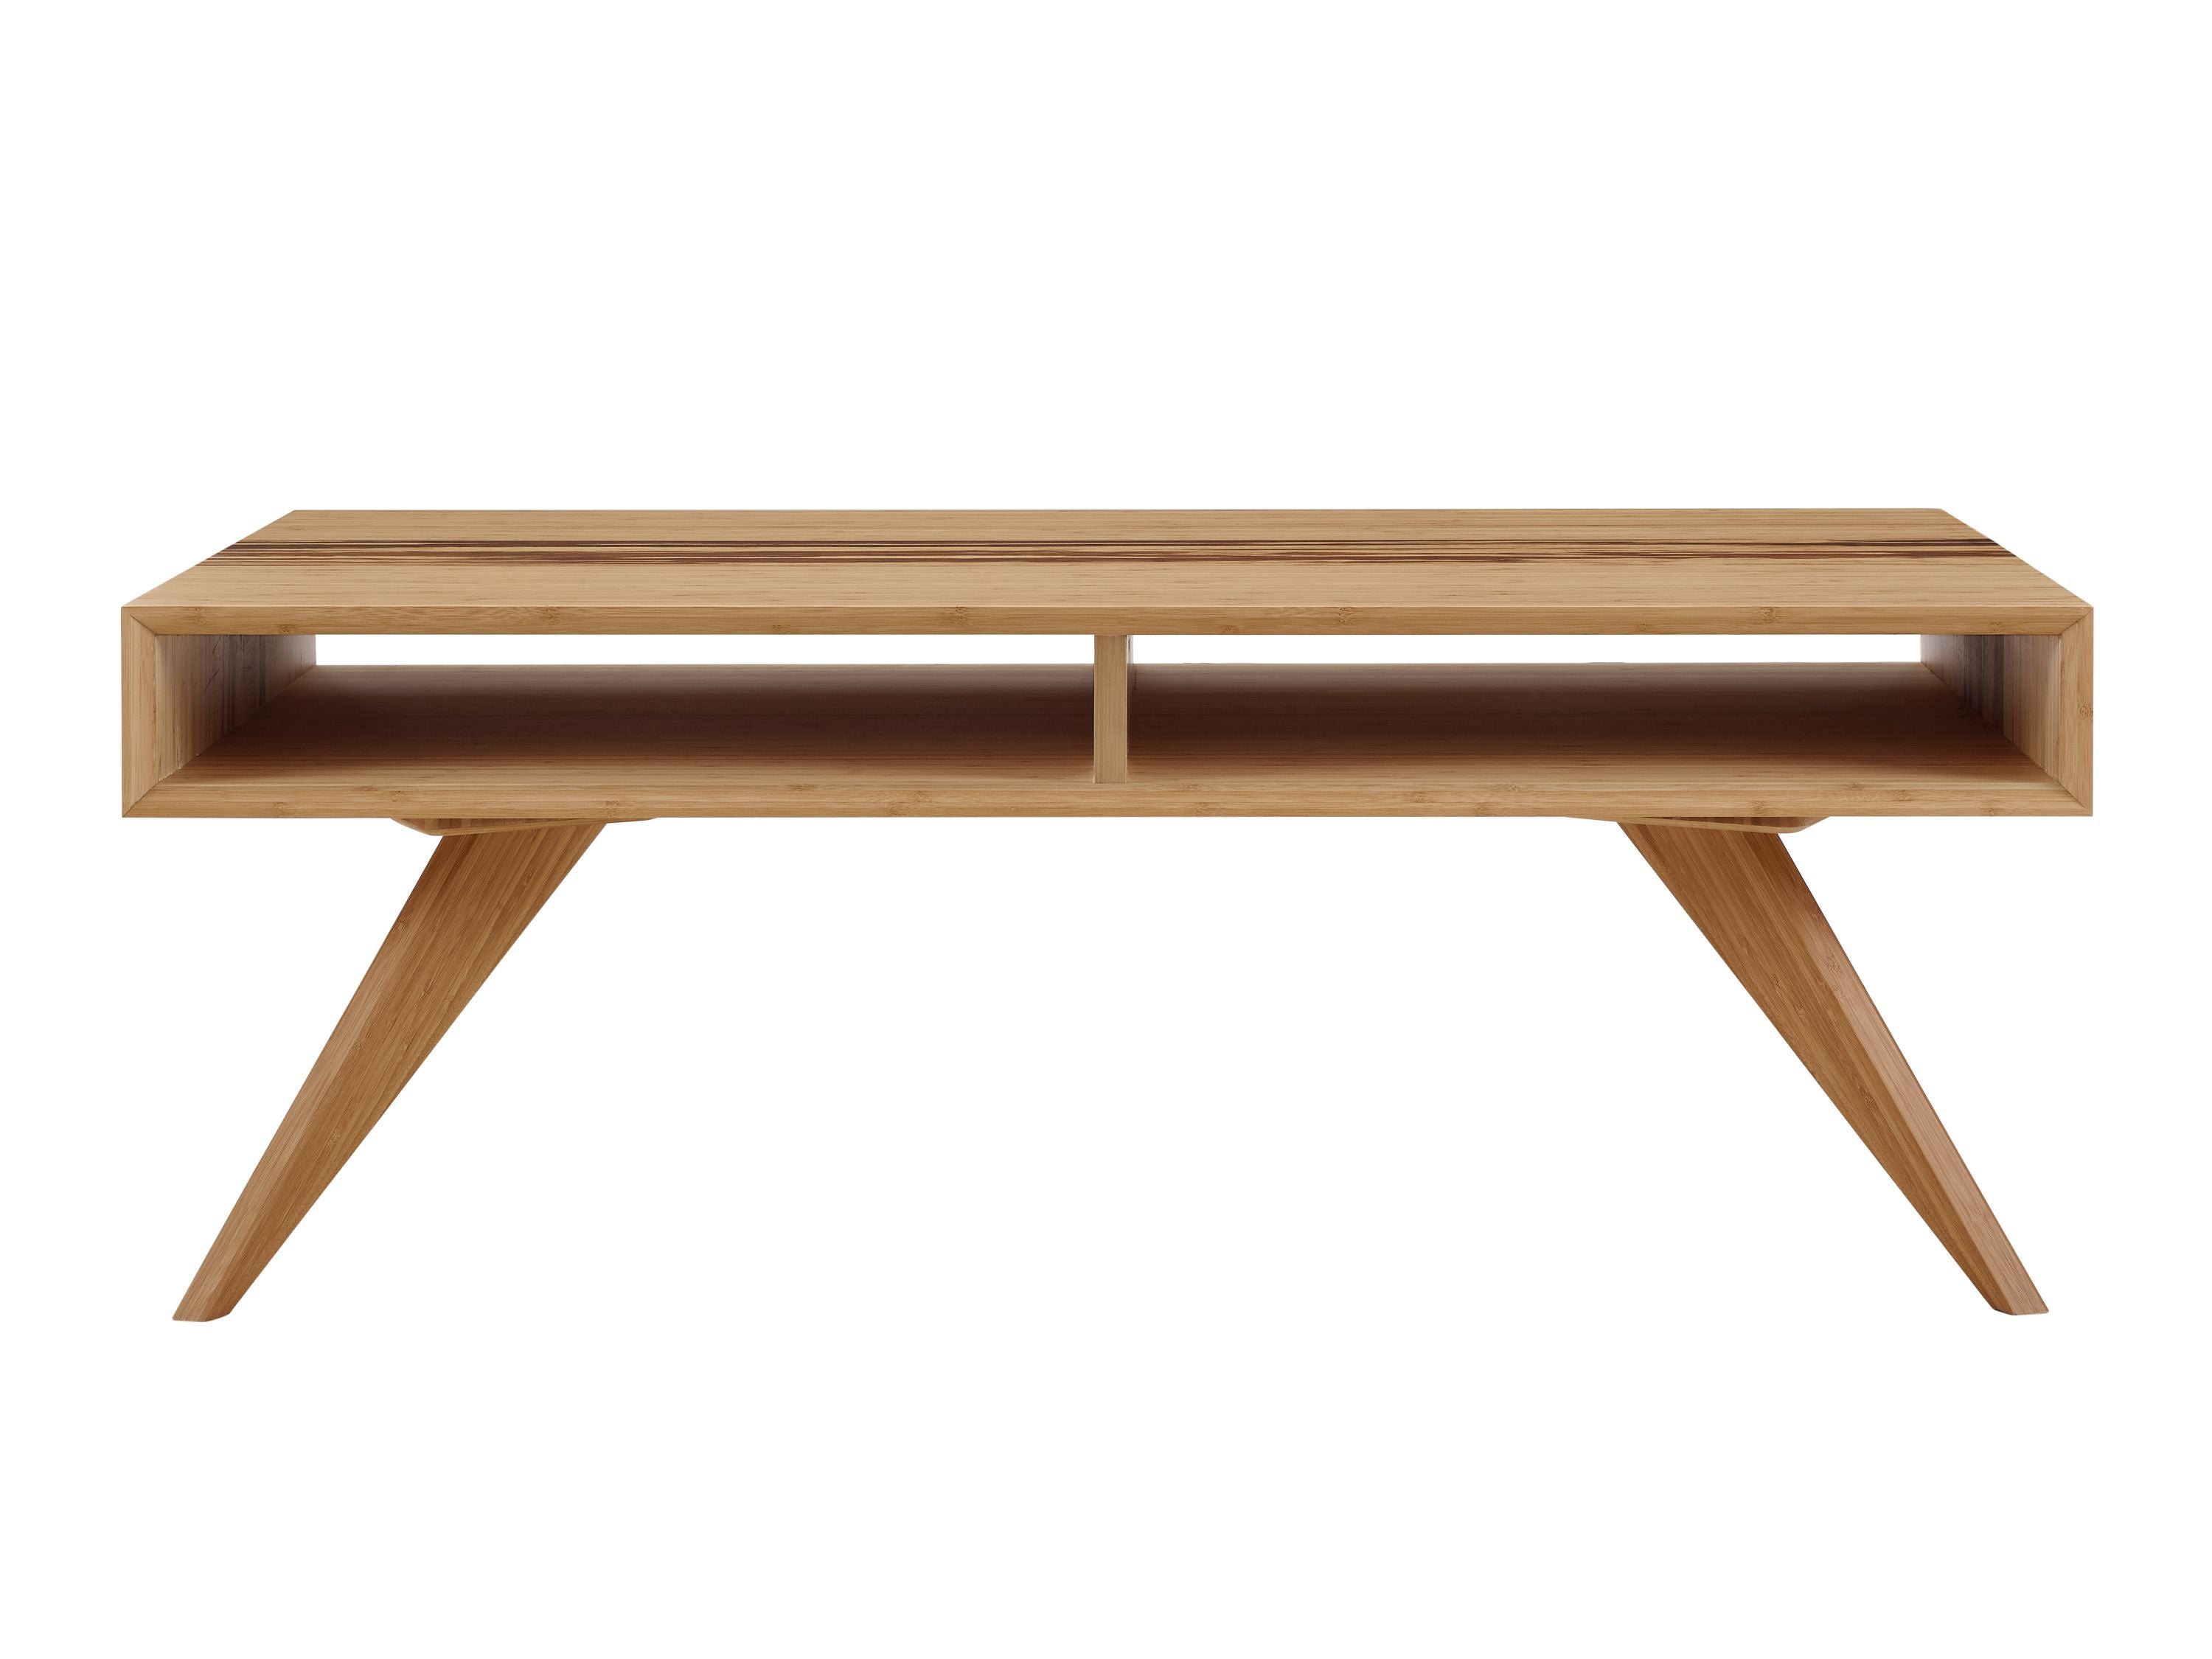 Greenington's Modern and Sustainable Azara Solid Bamboo Occasional Coffee Table in Caramelized Finish with Exotic Tiger Accent